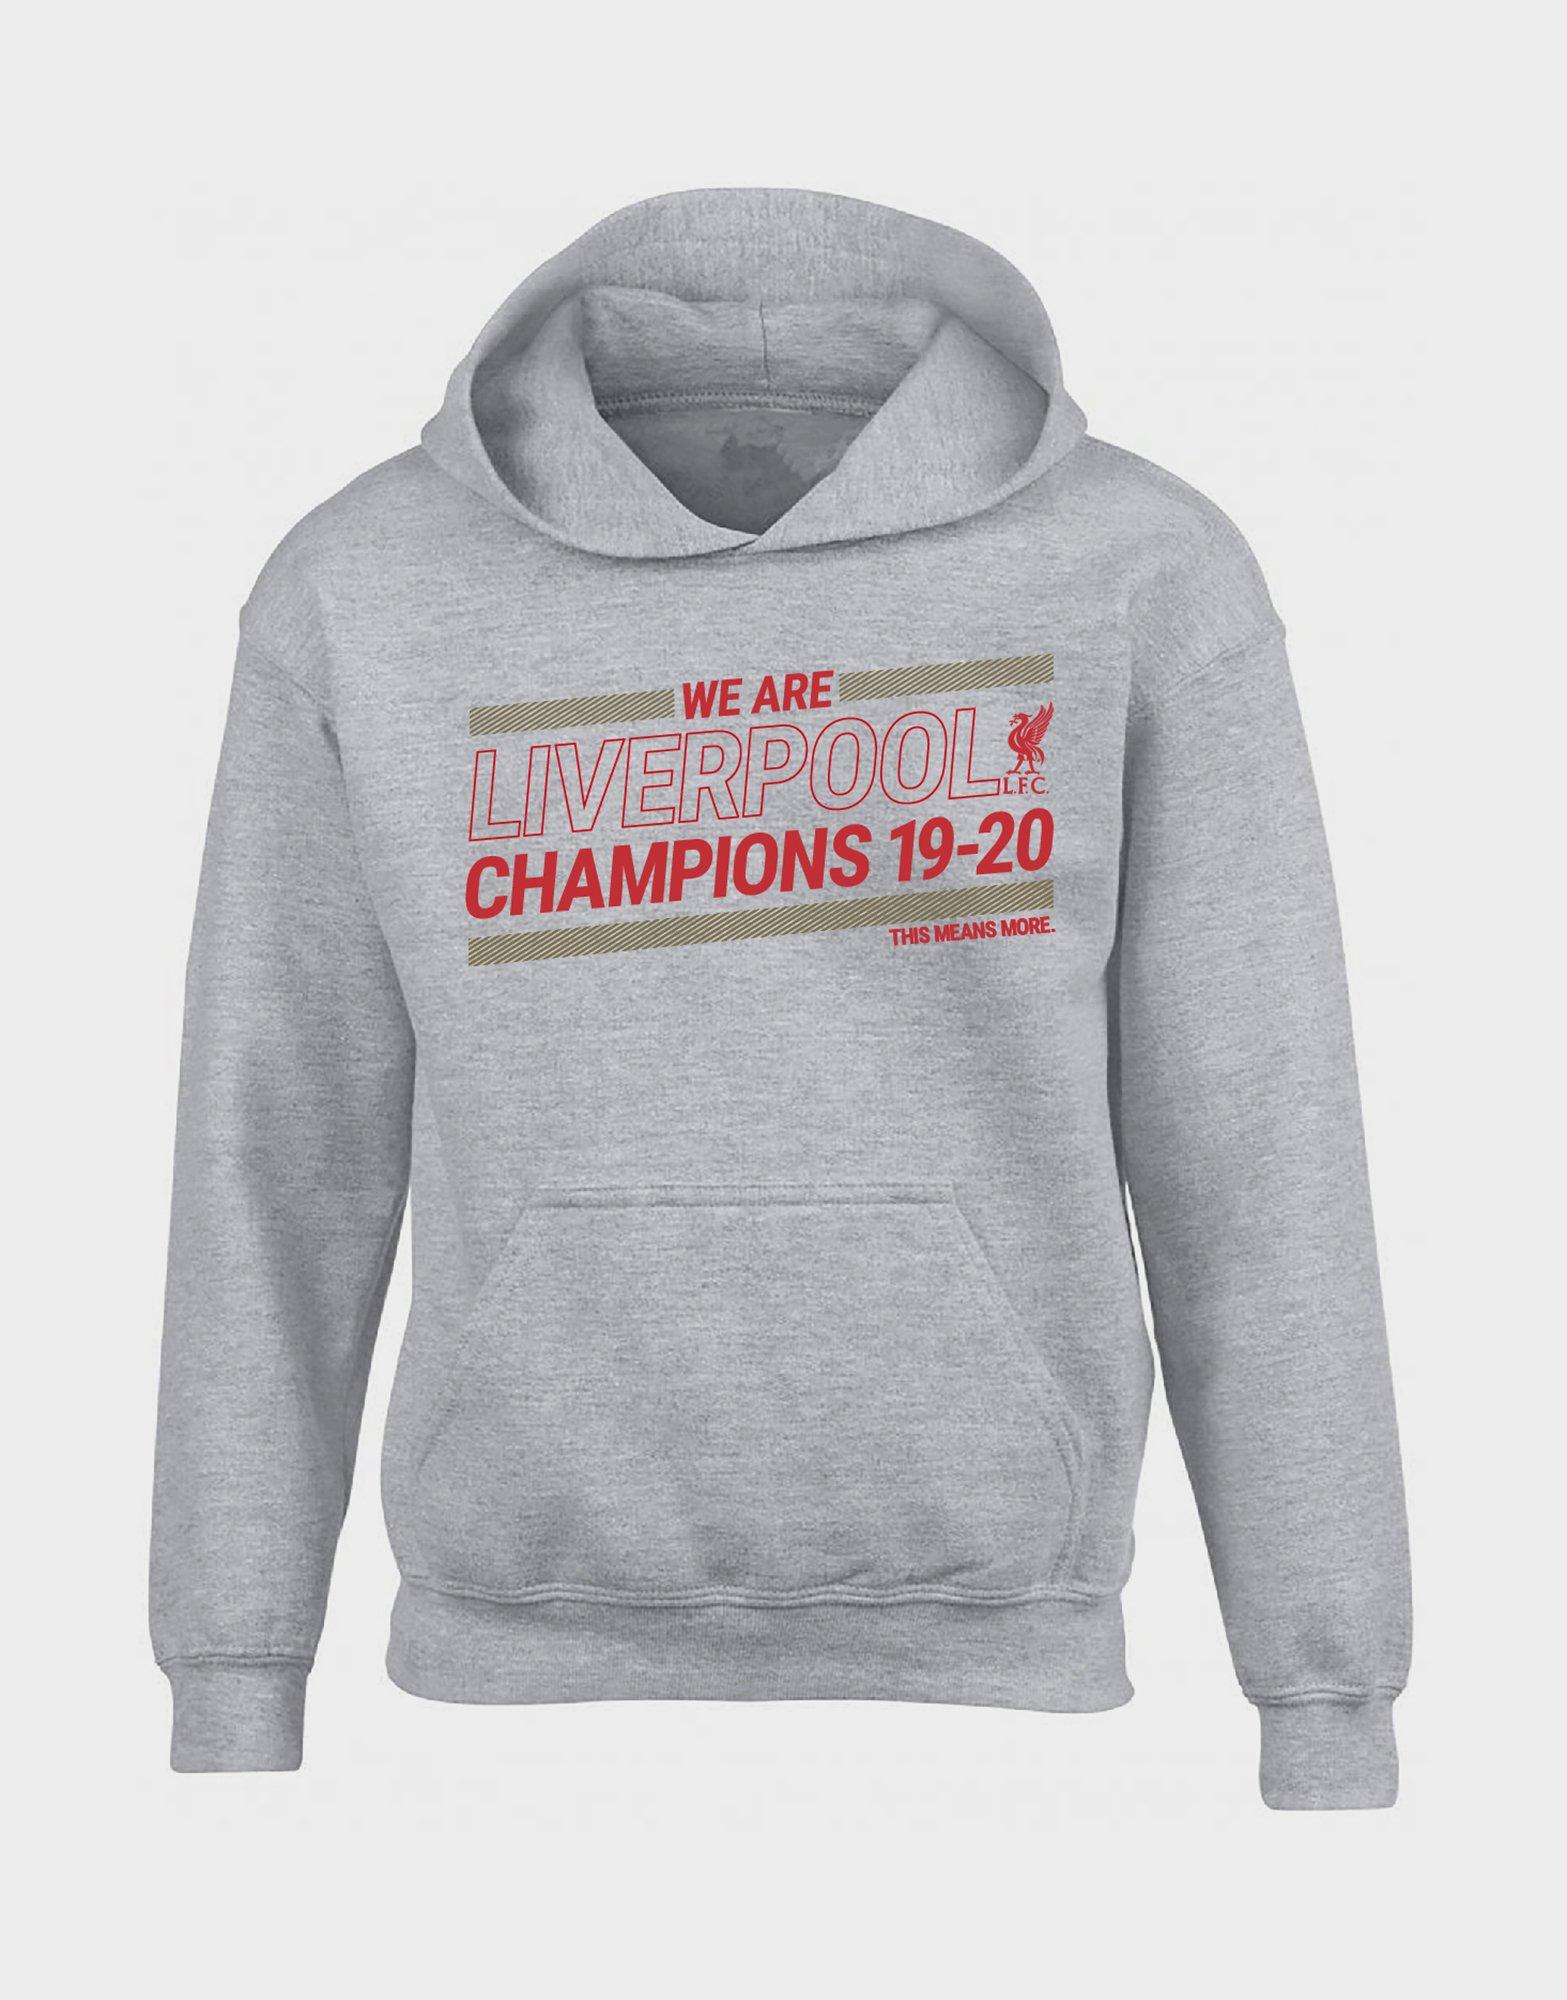 we are the champions jumper